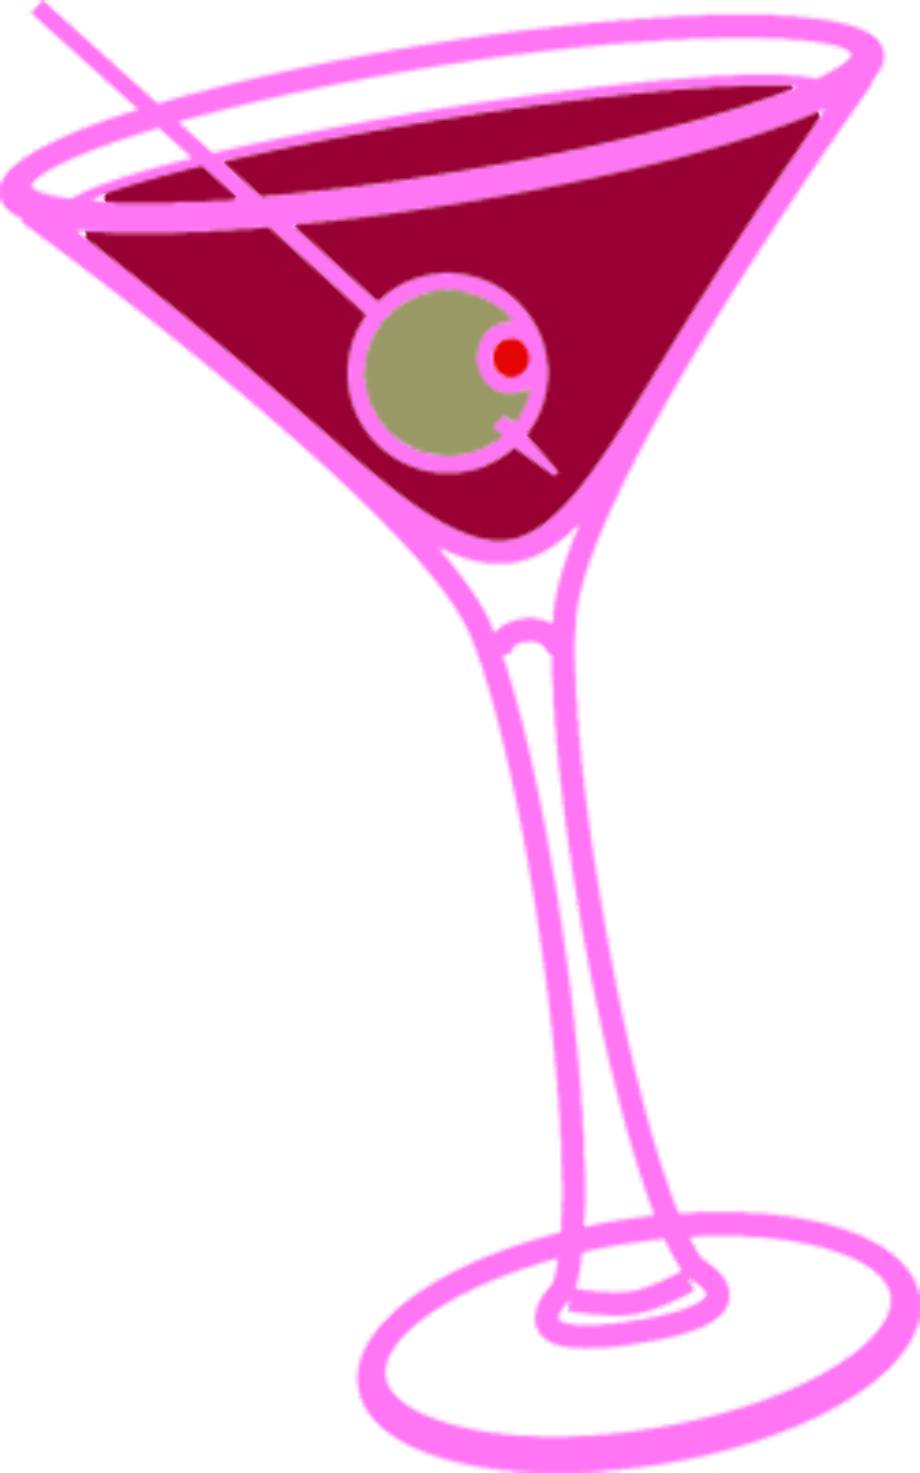 Download High Quality martini glass clipart pink Transparent PNG Images